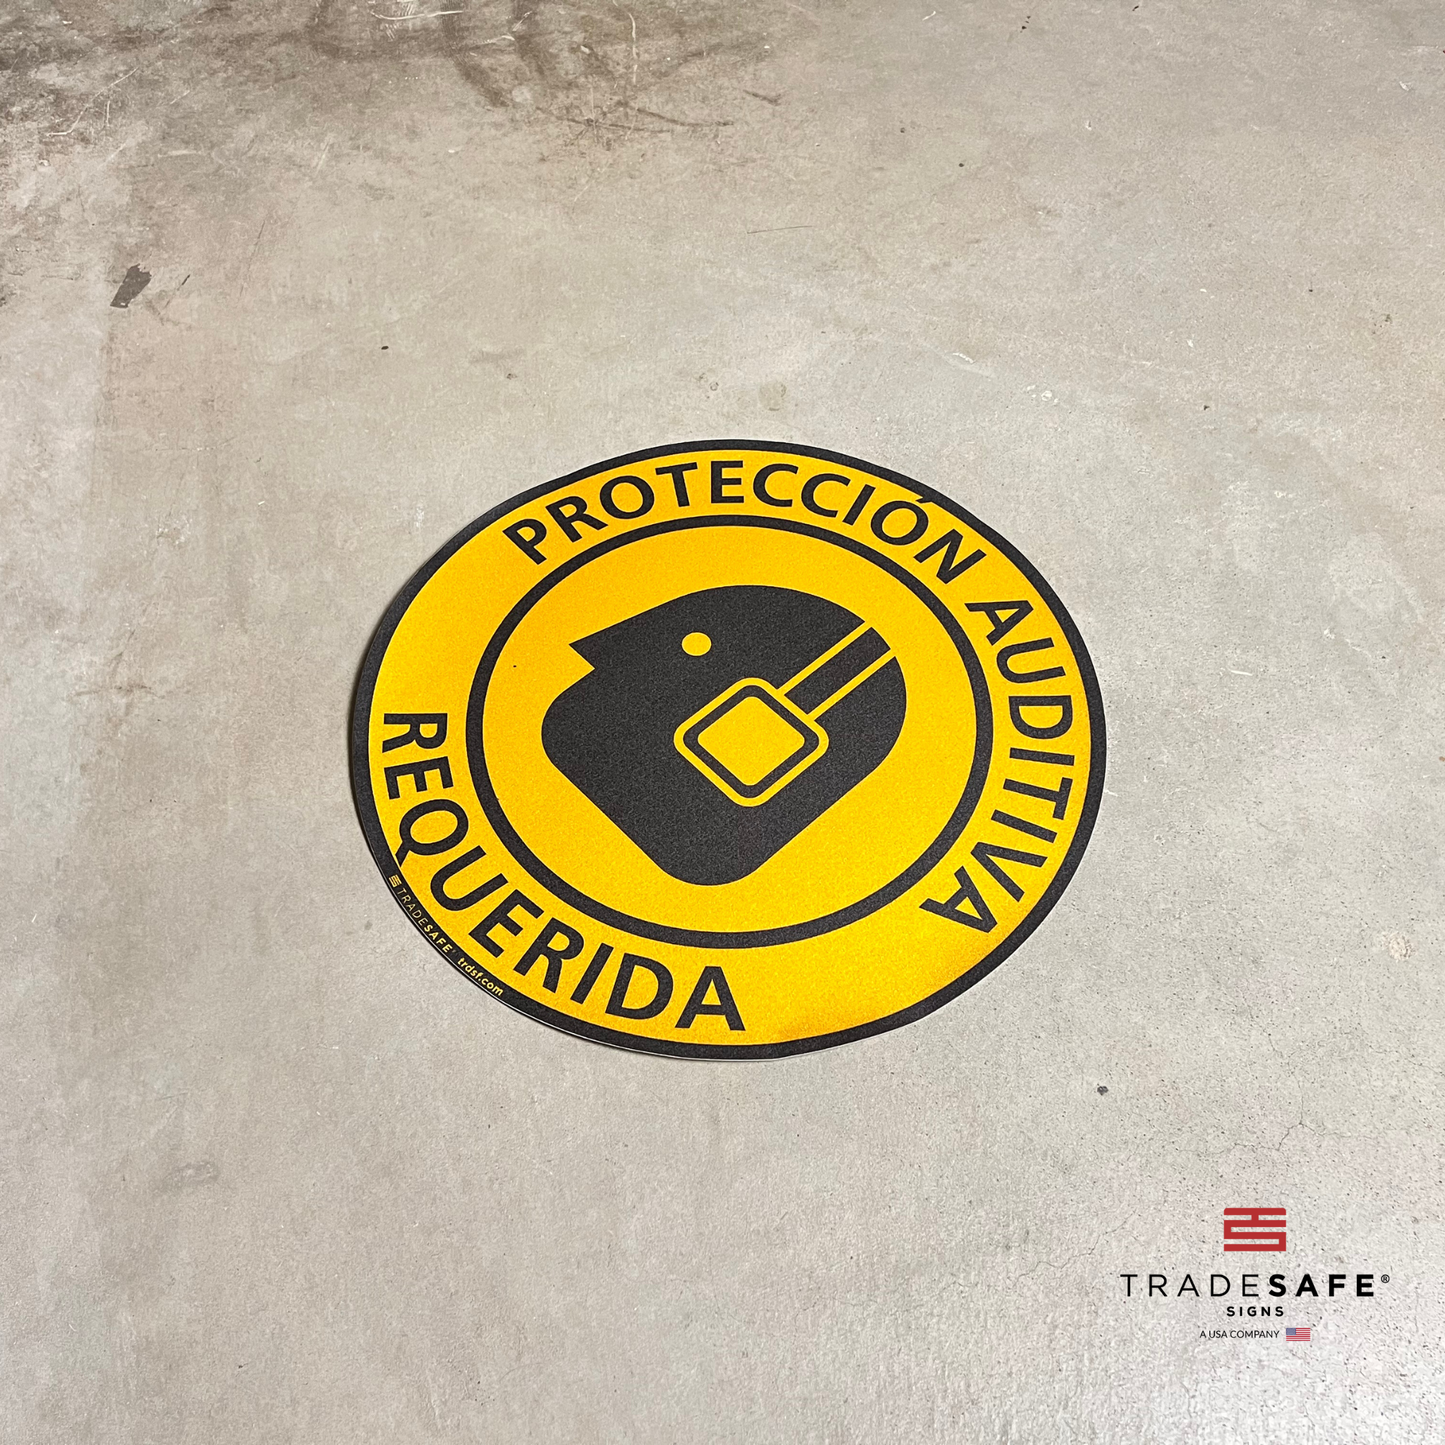 hearing protection required sign in spanish